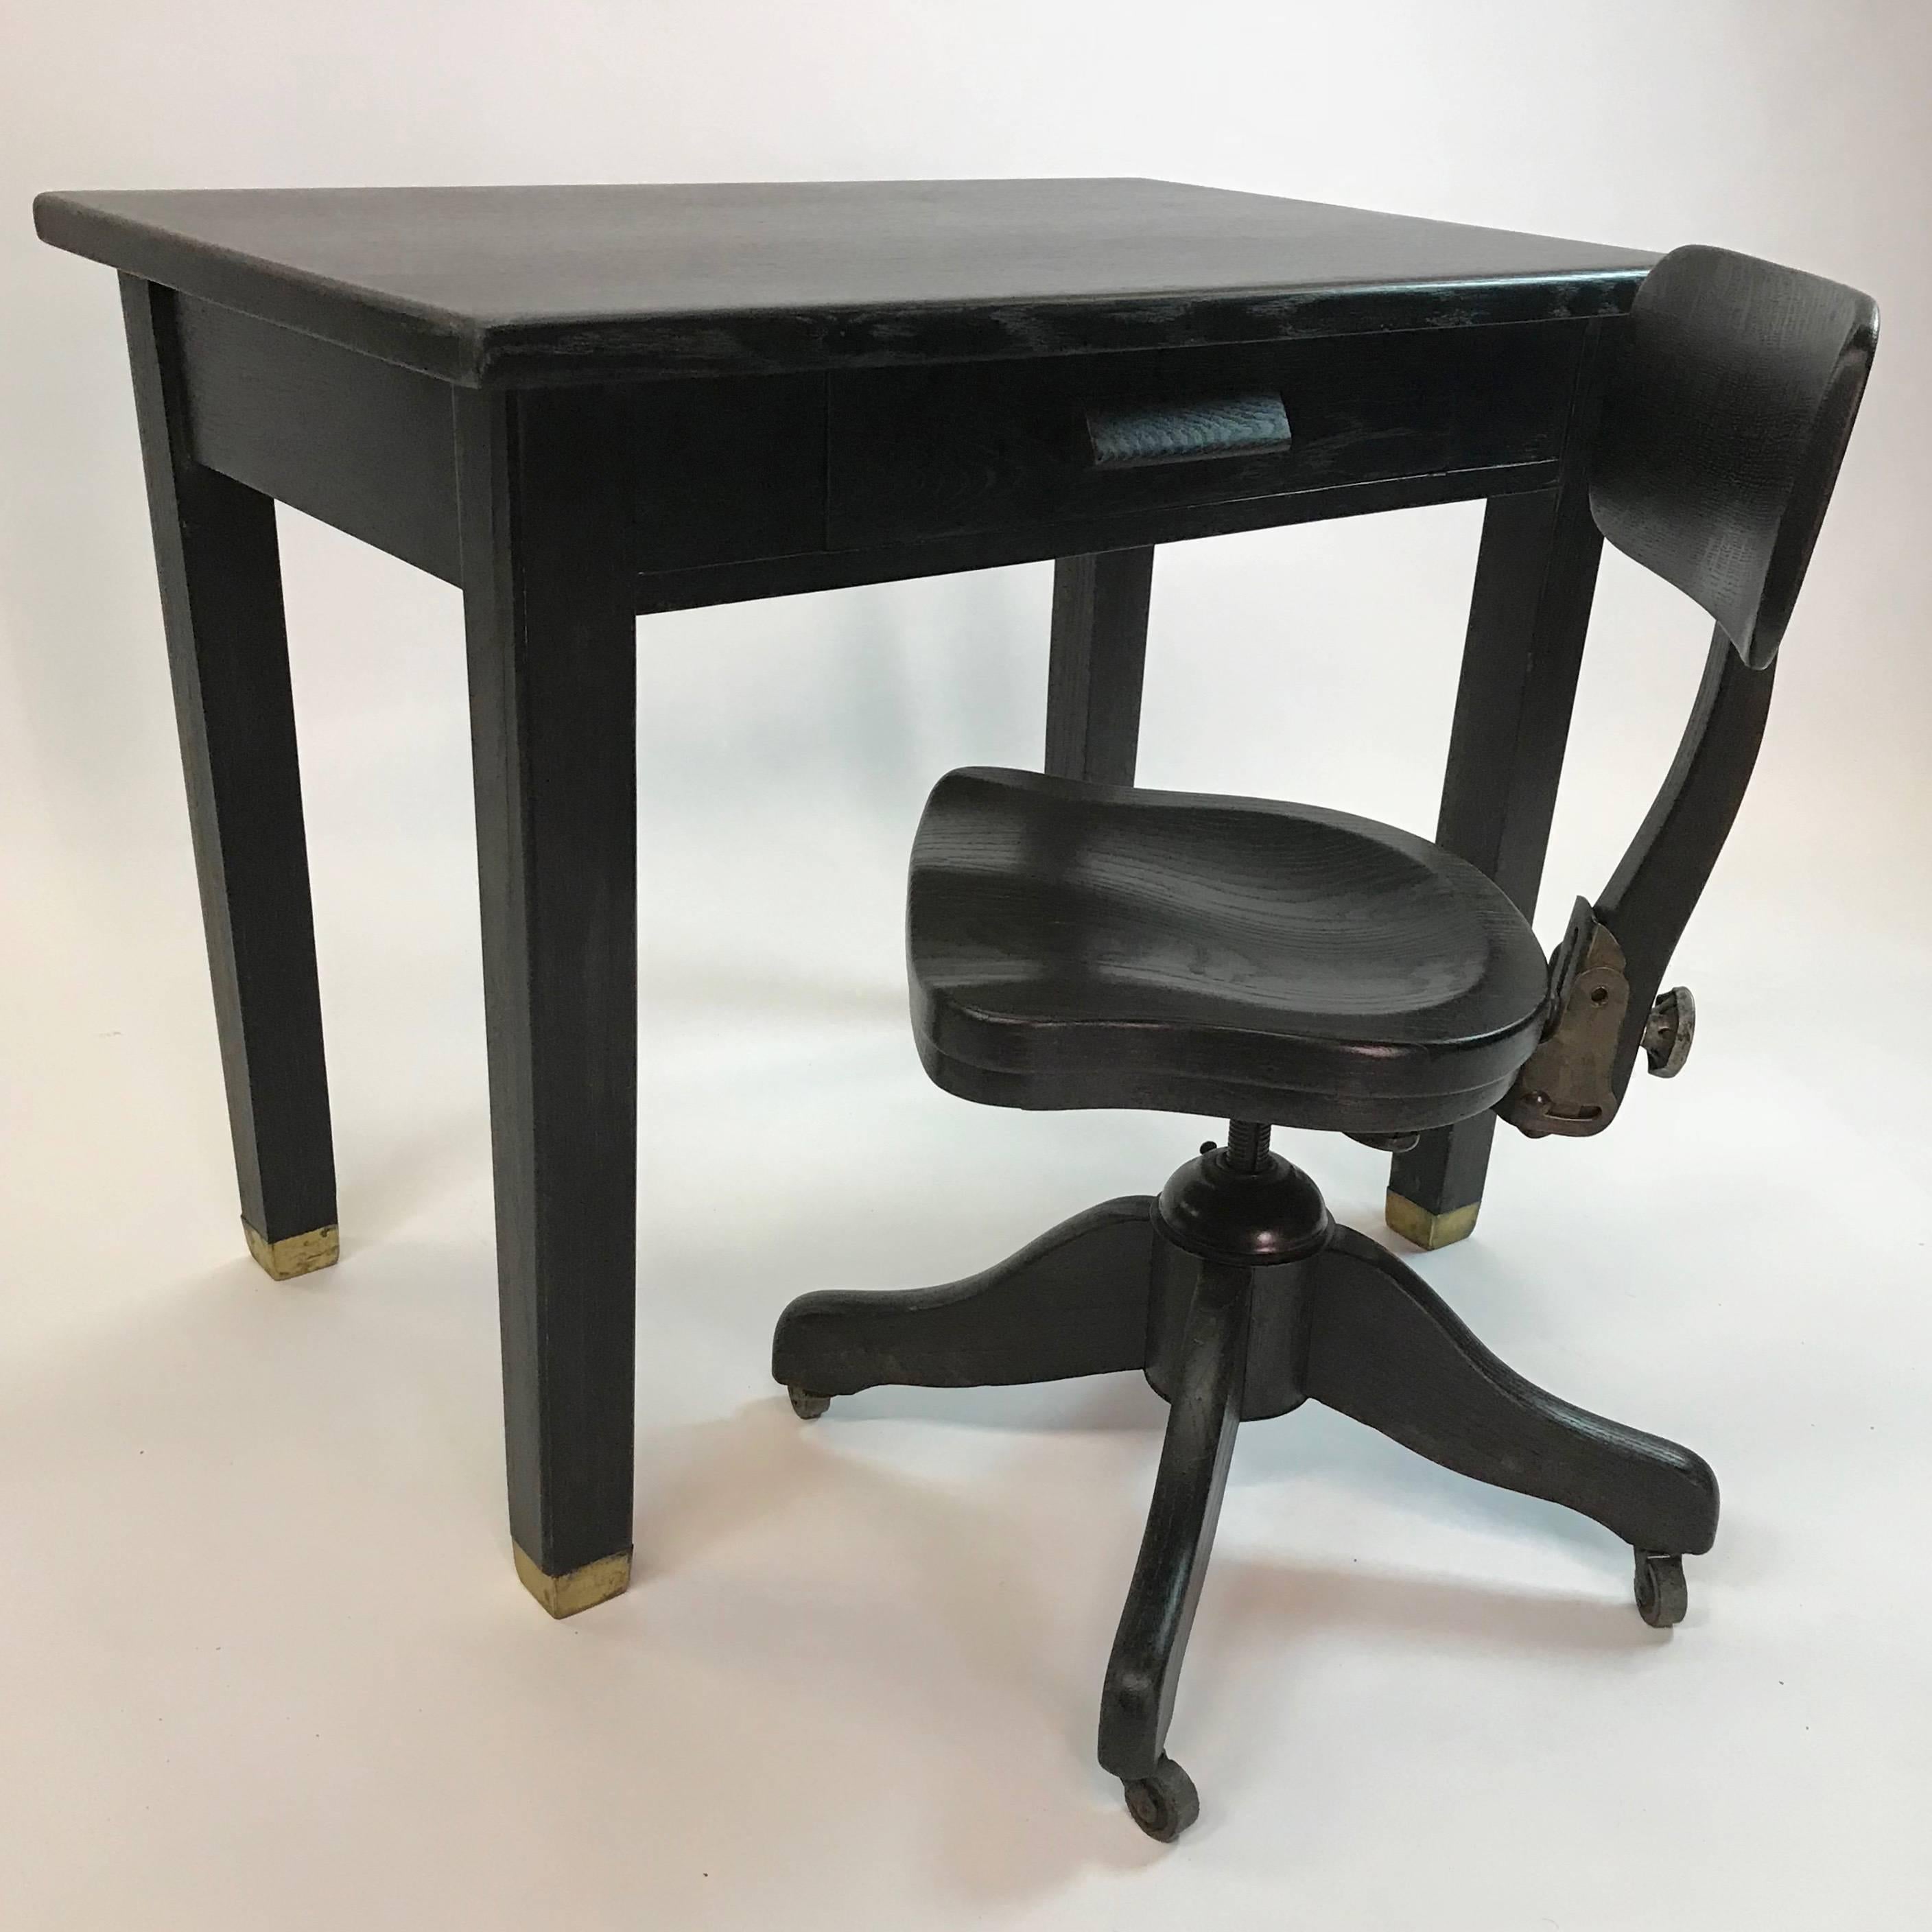 Industrial, ebonized oak, library desk features brass capped legs and is accompanied by a matching, height adjustable, tilt-back, desk chair. The chair's foot print is 24 inches square, seat width is 16 inches, overall depth is 18 inches and height